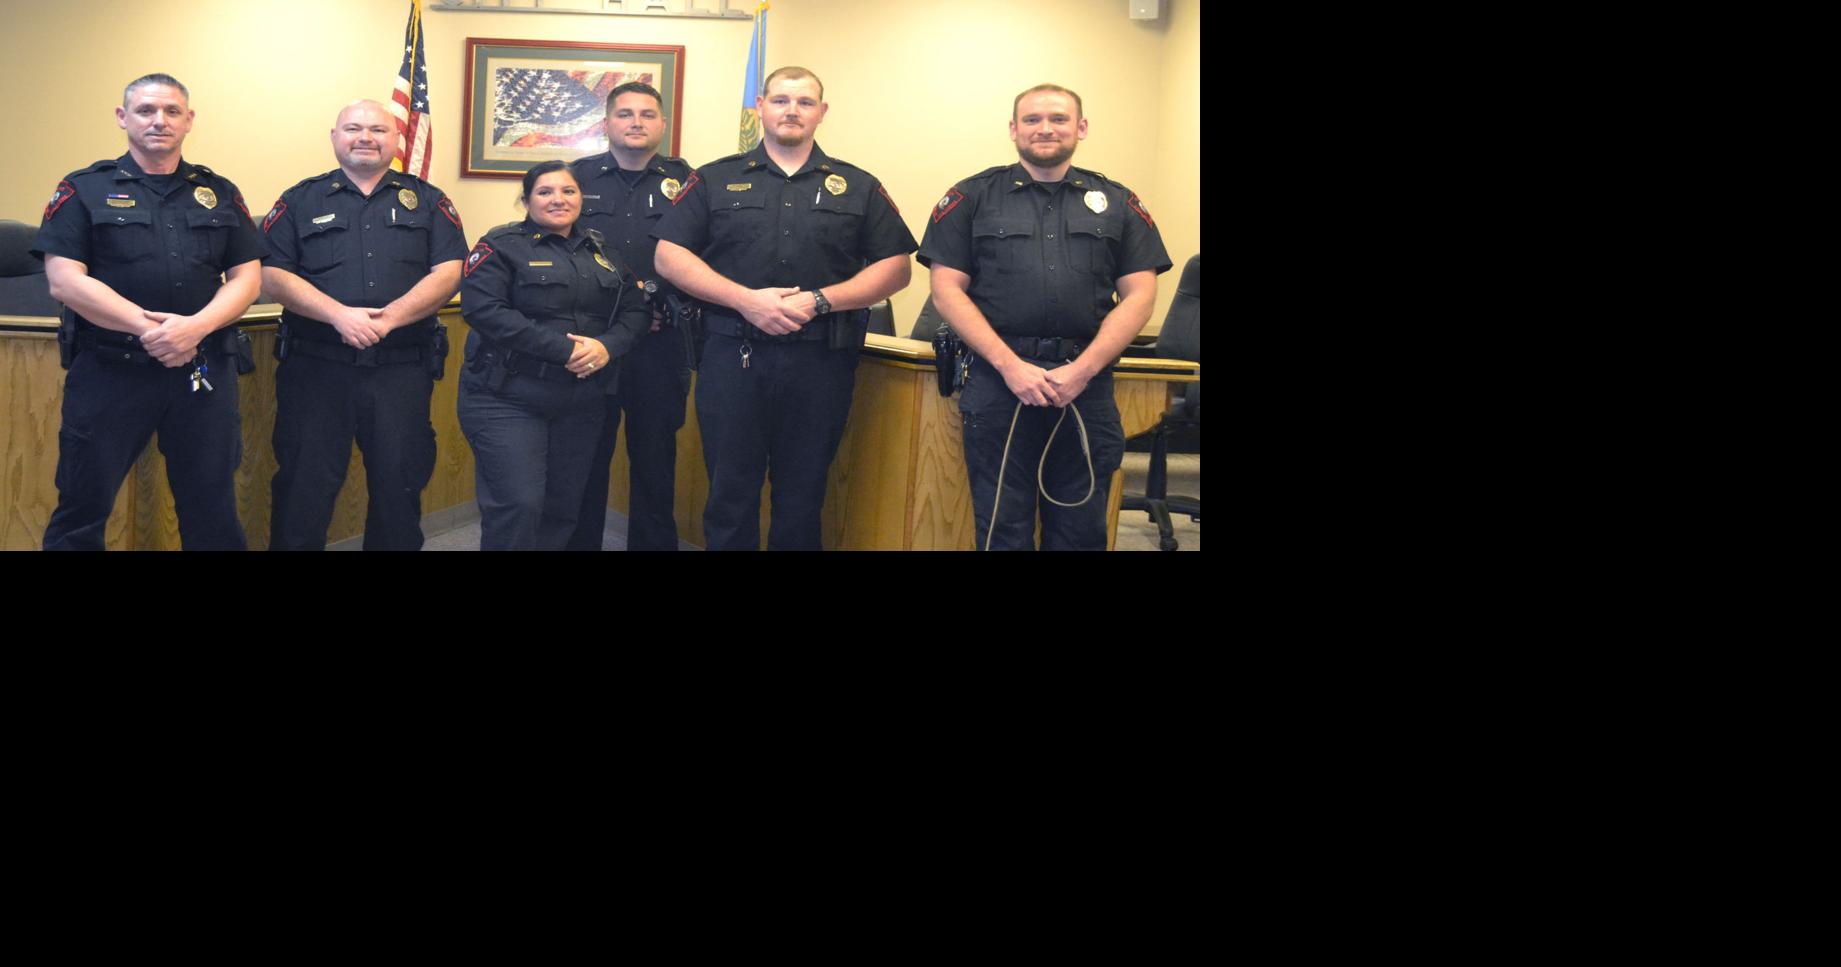 Comanche Police Department gets ‘pinned’ | News | duncanbanner.com